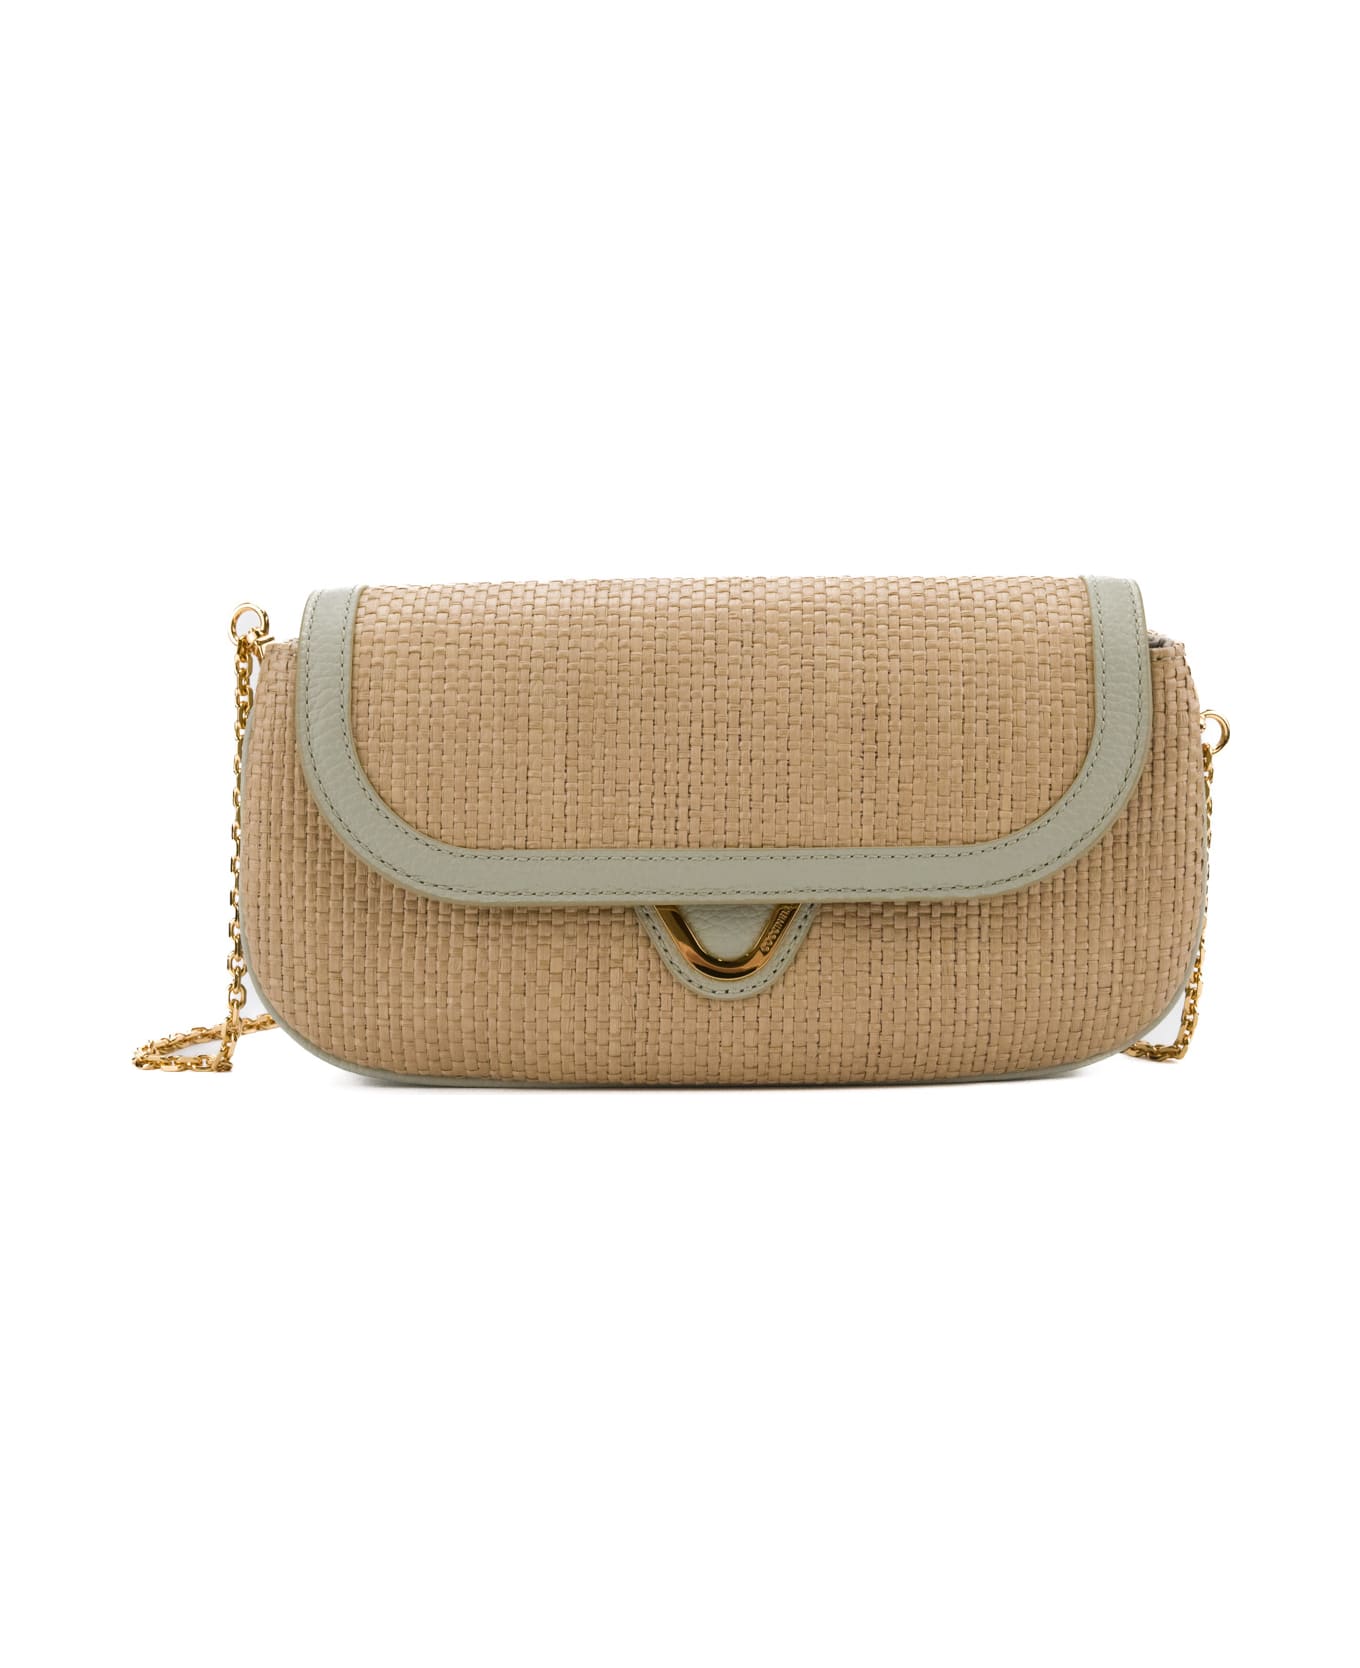 Coccinelle Raffia And Leather Bag - Natural/cela gr. ショルダーバッグ